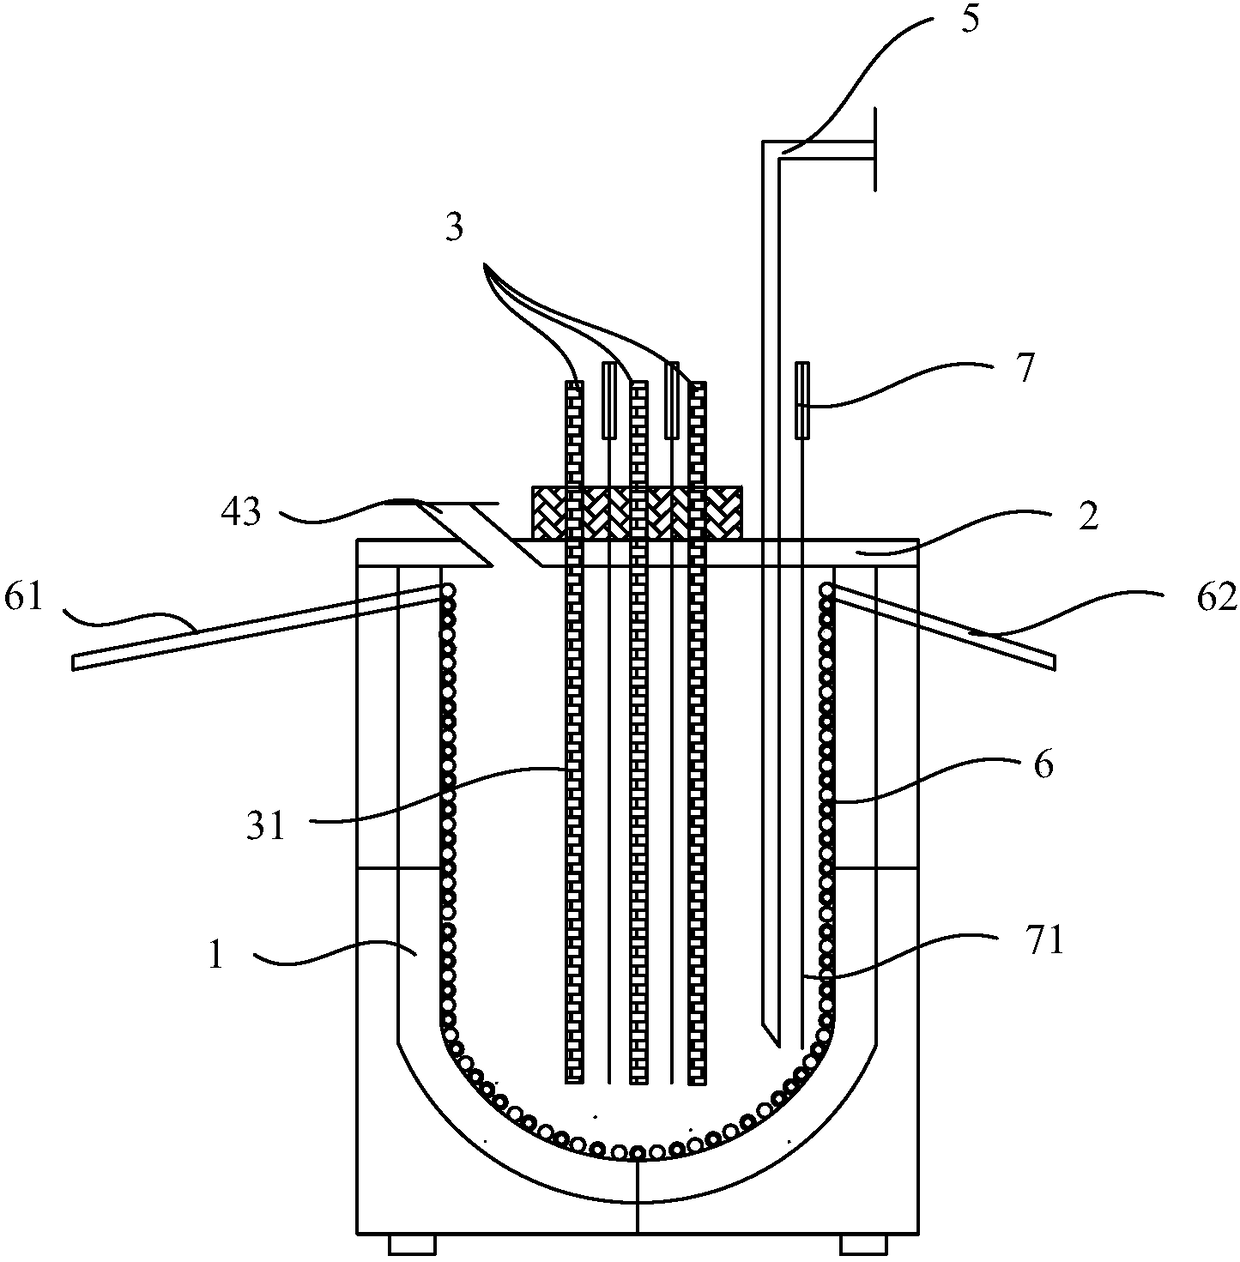 Solid salt heating and melting device and method